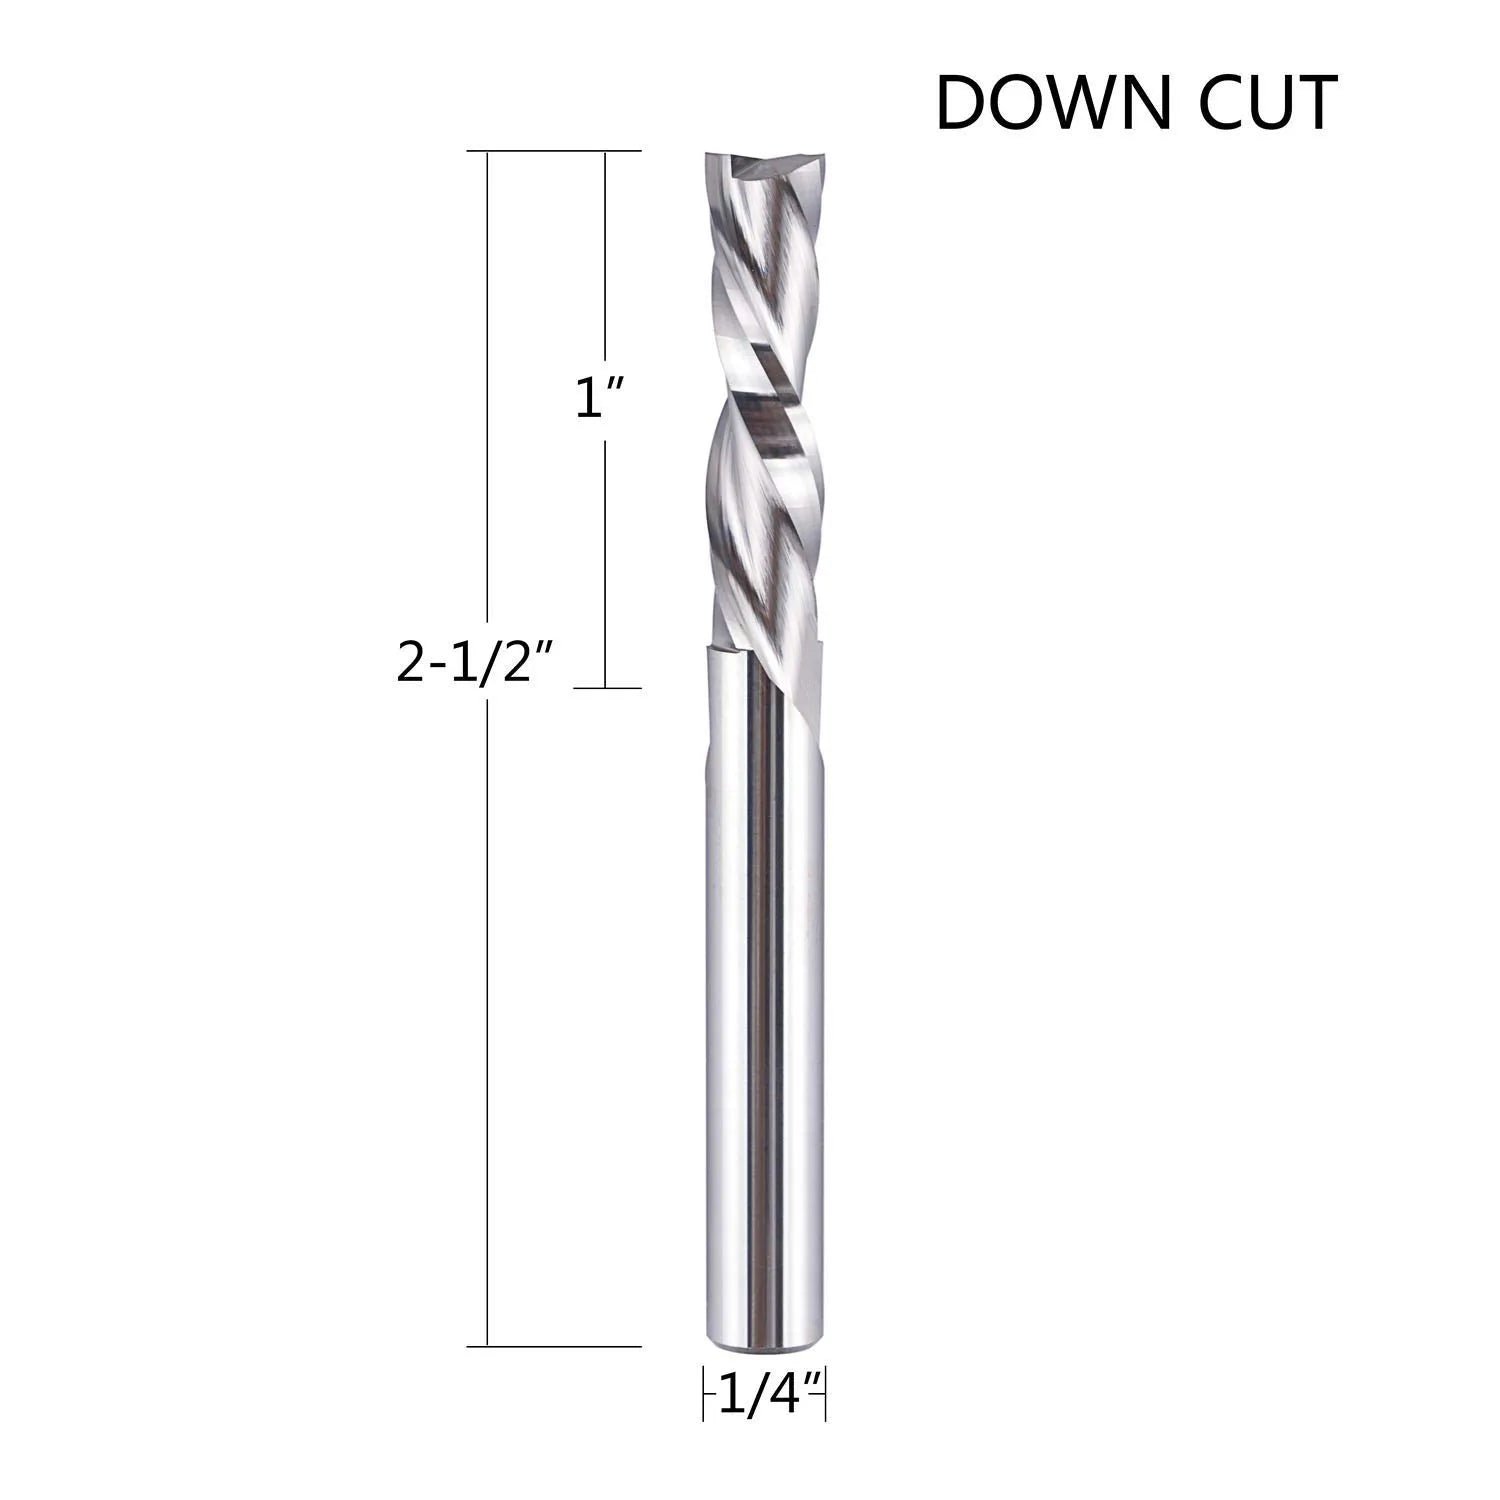 SpeTool Spiral Router Bits Down Cut 1/4 Diam End Mill for Woodworking